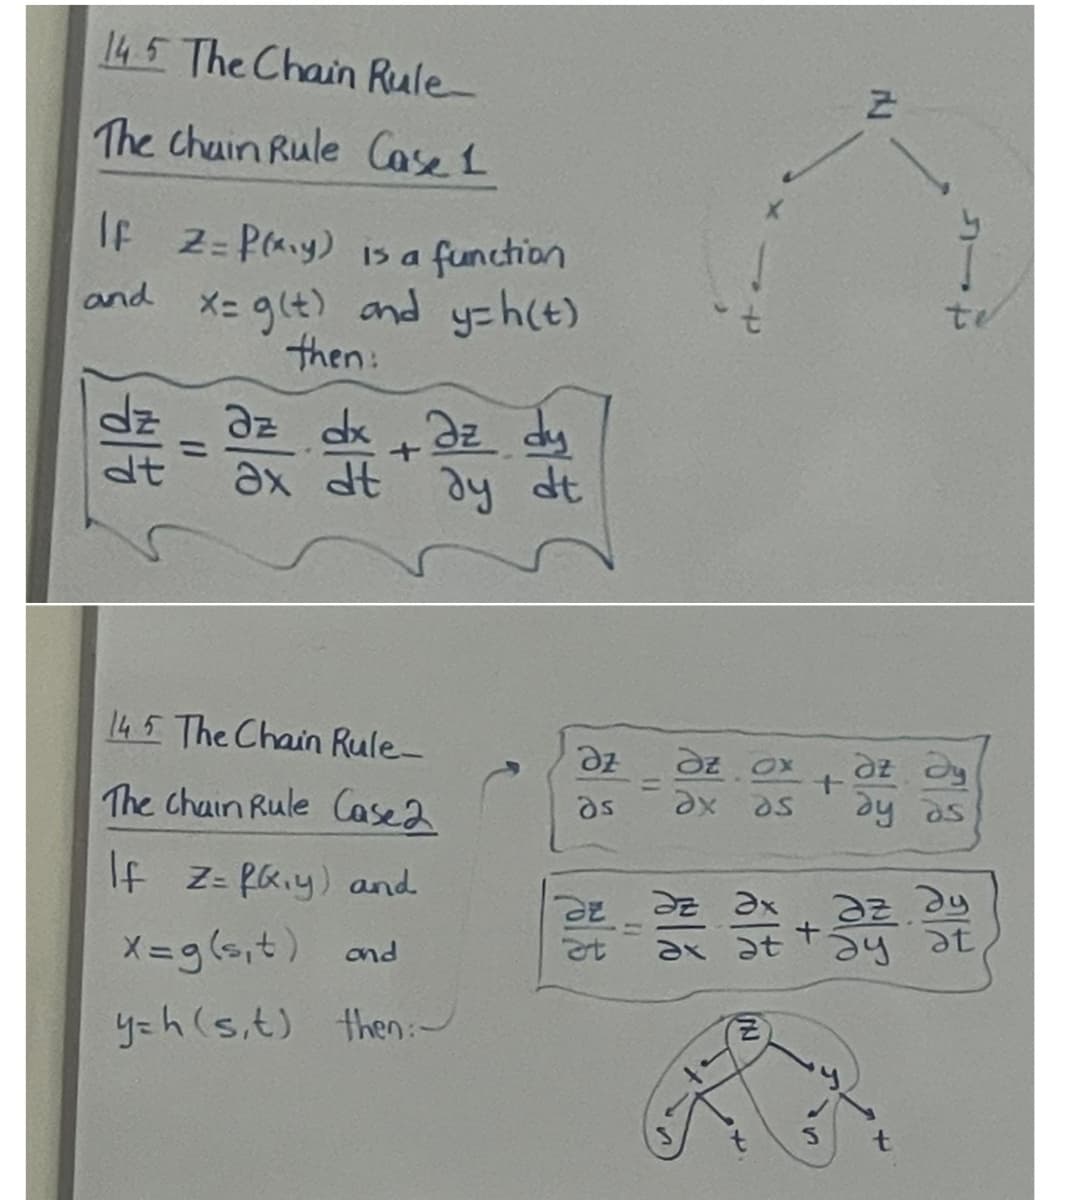 14.5 The Chain Rule-
The Chain Rule Case 1
If Z= P(x₁y) is a function
and x= g(t) and y=h(t)
then:
#
dt
Əz dx az dy
dy dt
ax dt
14.5 The Chain Rule-
The Chain Rule Case 2
If Z= fk₁y) and
X=g(s, t) and
y=h (s, t) then:
dz
as
DE
at
az ox
ax as
+
E
Əz Əy
ay as
az ax
az dy
ax at ay at